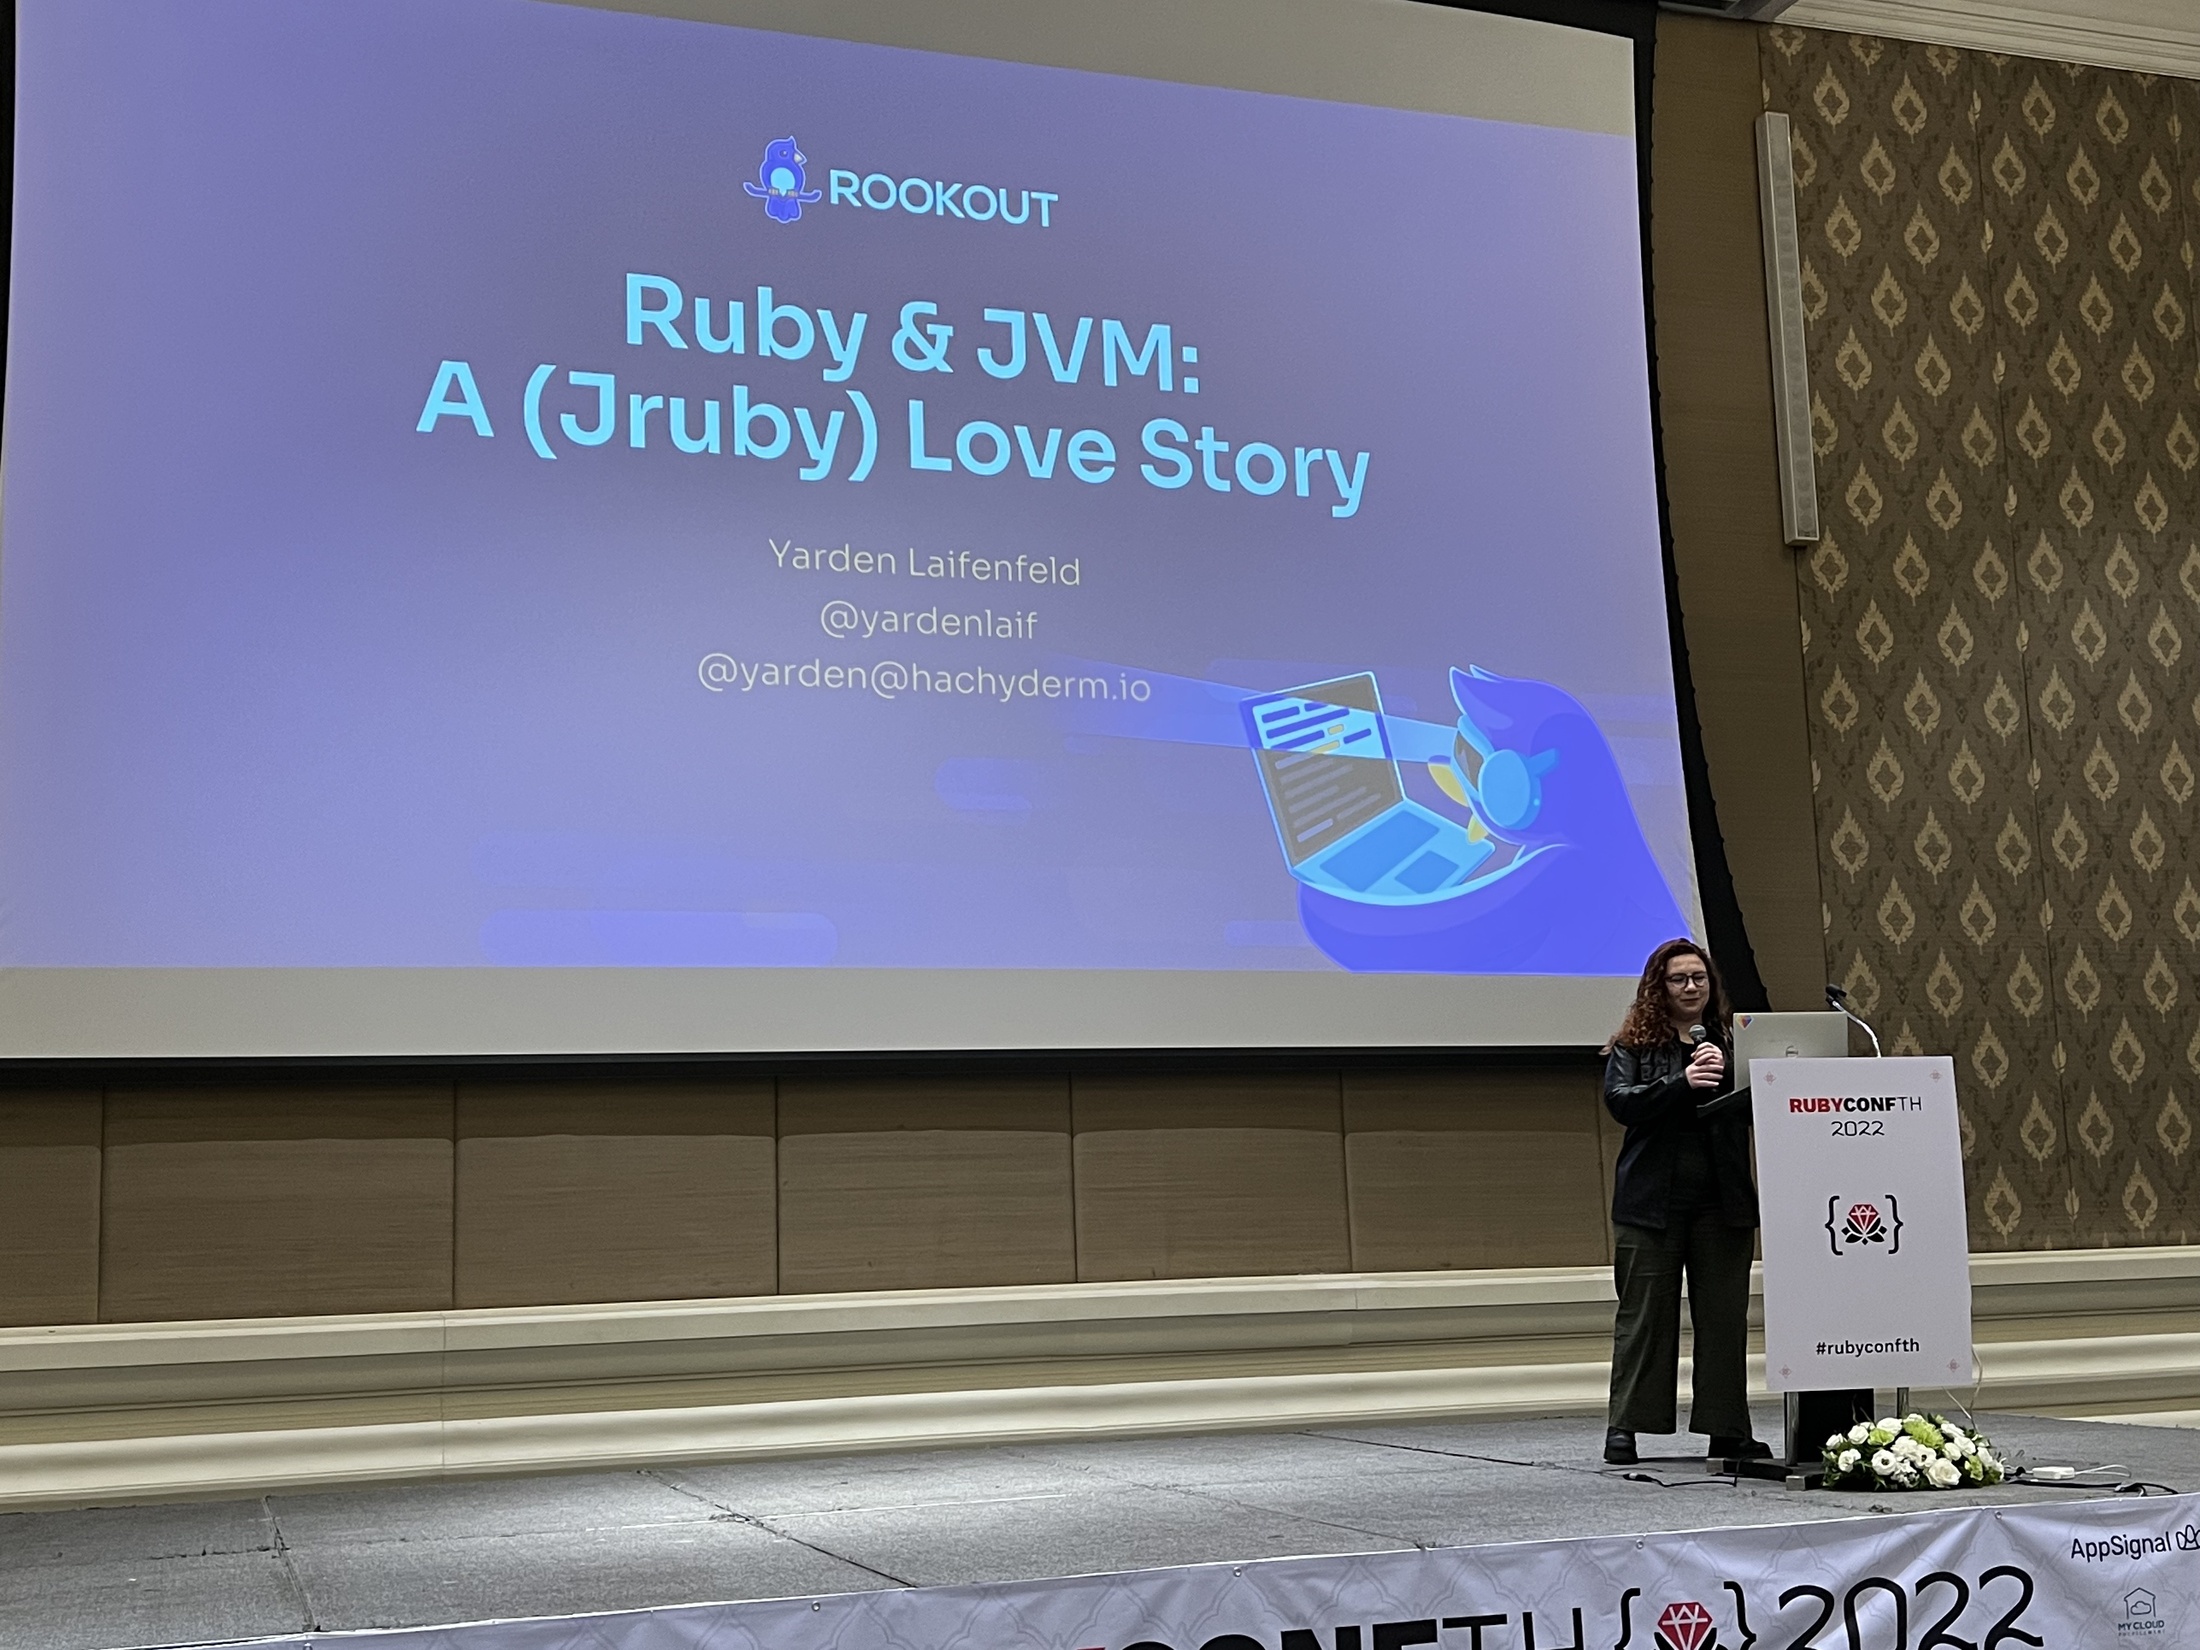 Rookout ruby and jvm